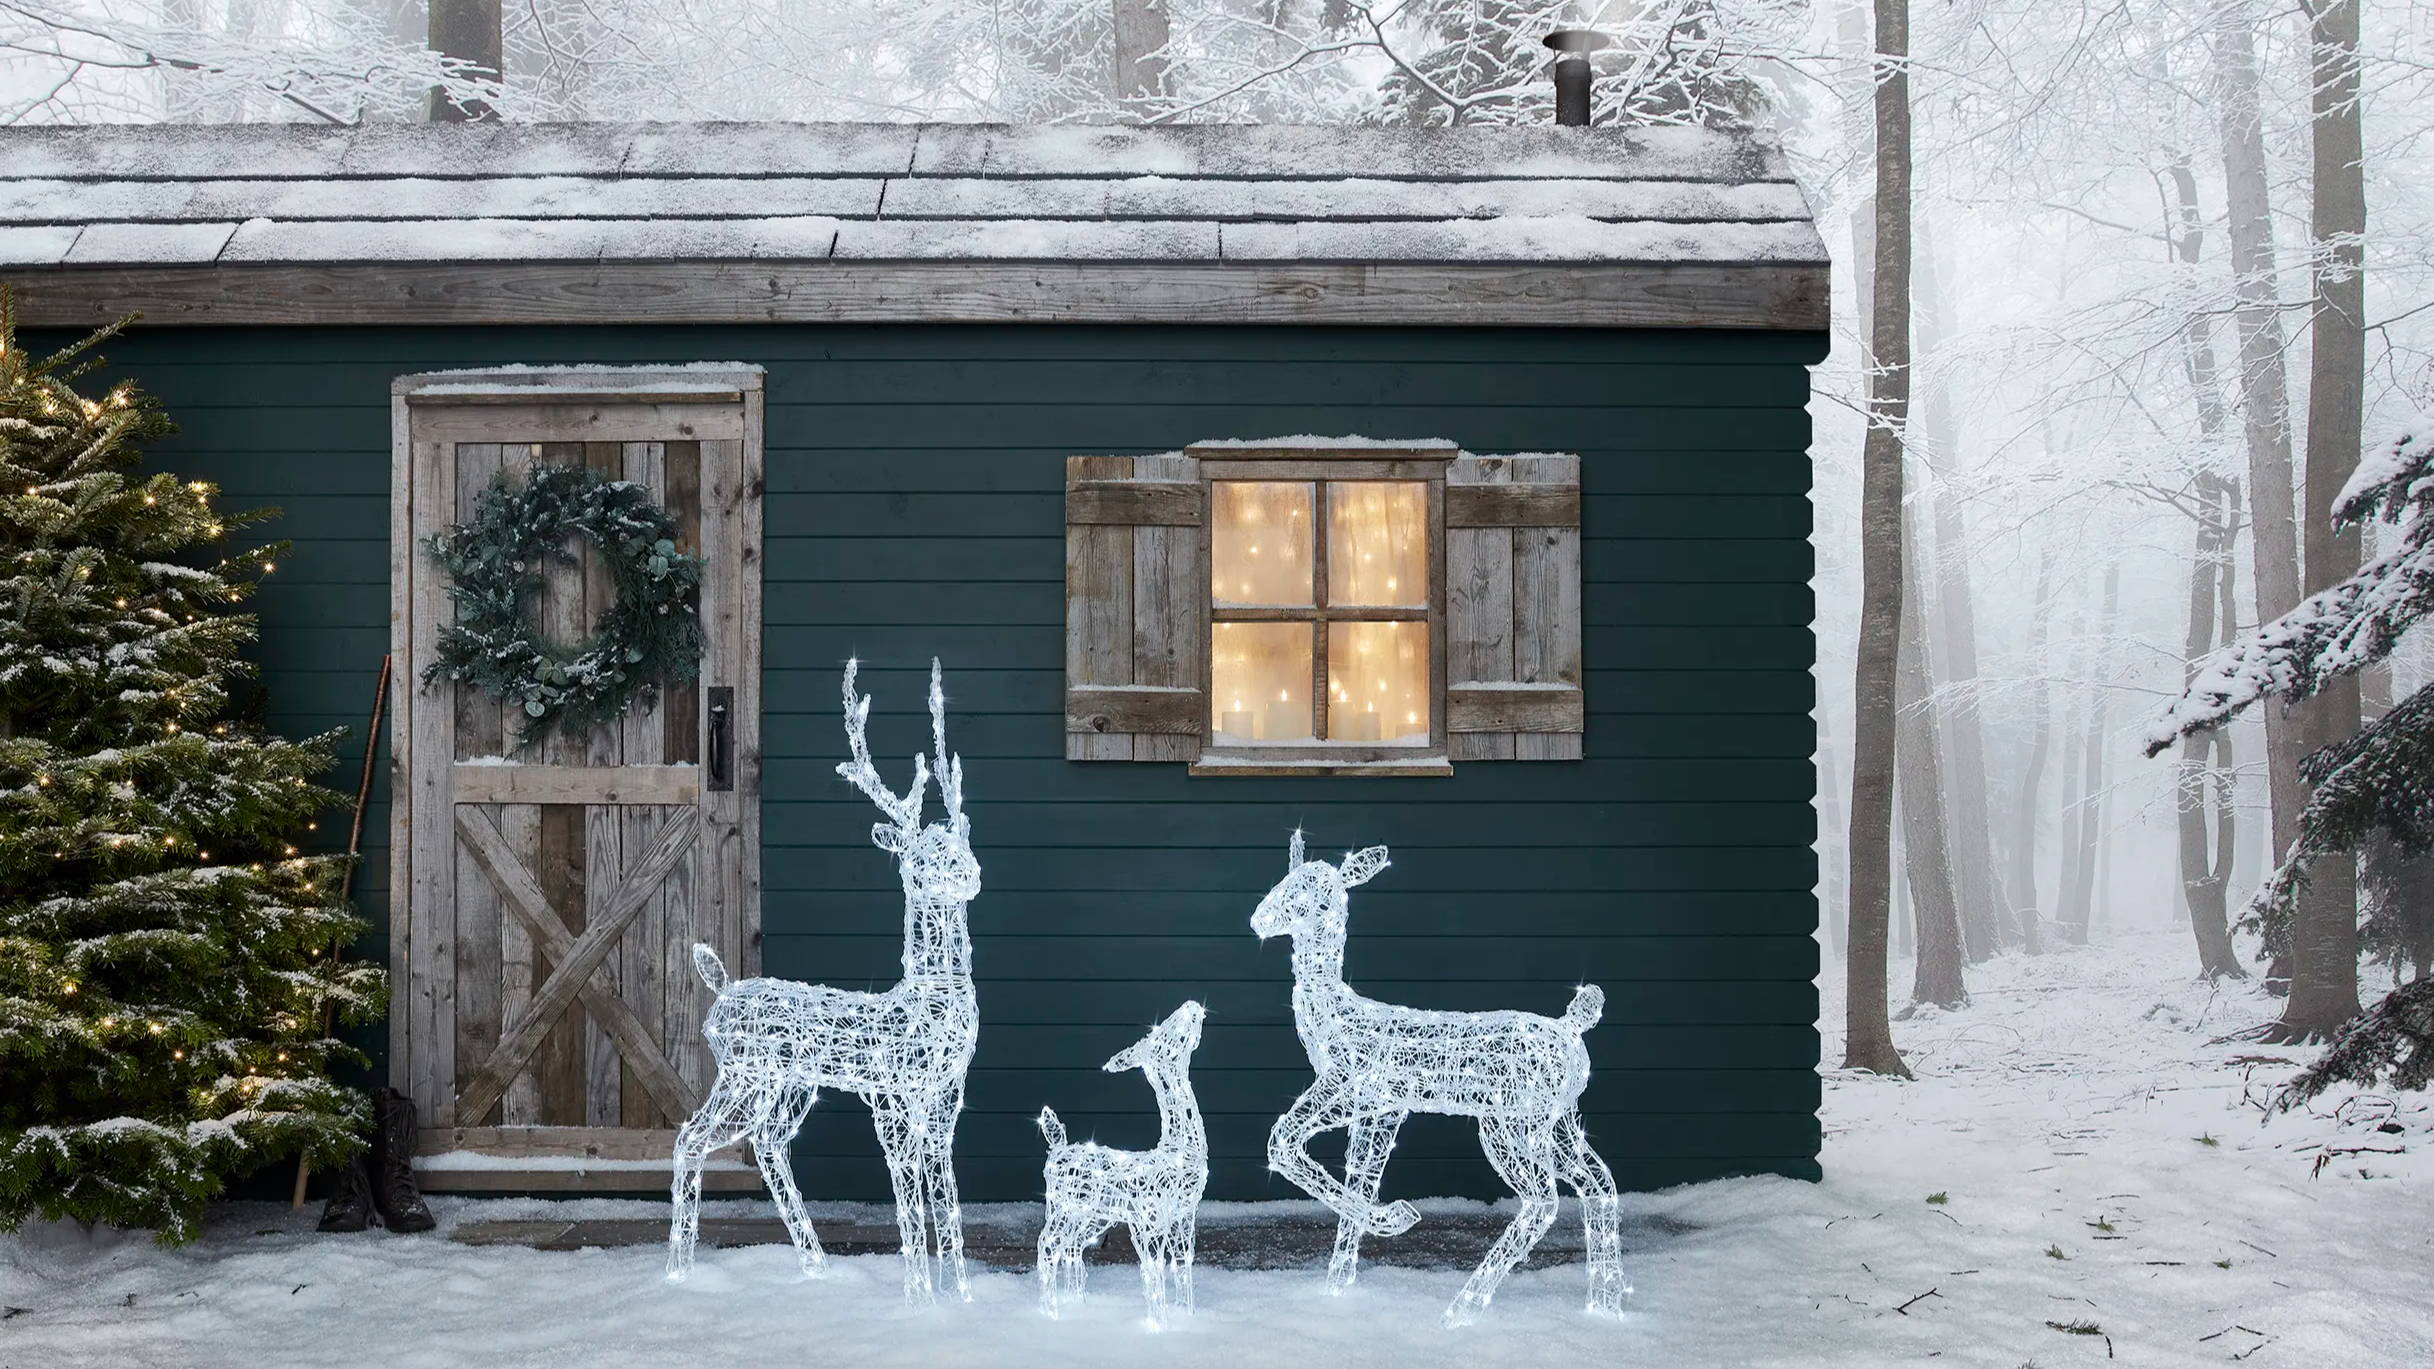 Family of white acrylic reindeer in a snowy setting in front of a blue home.